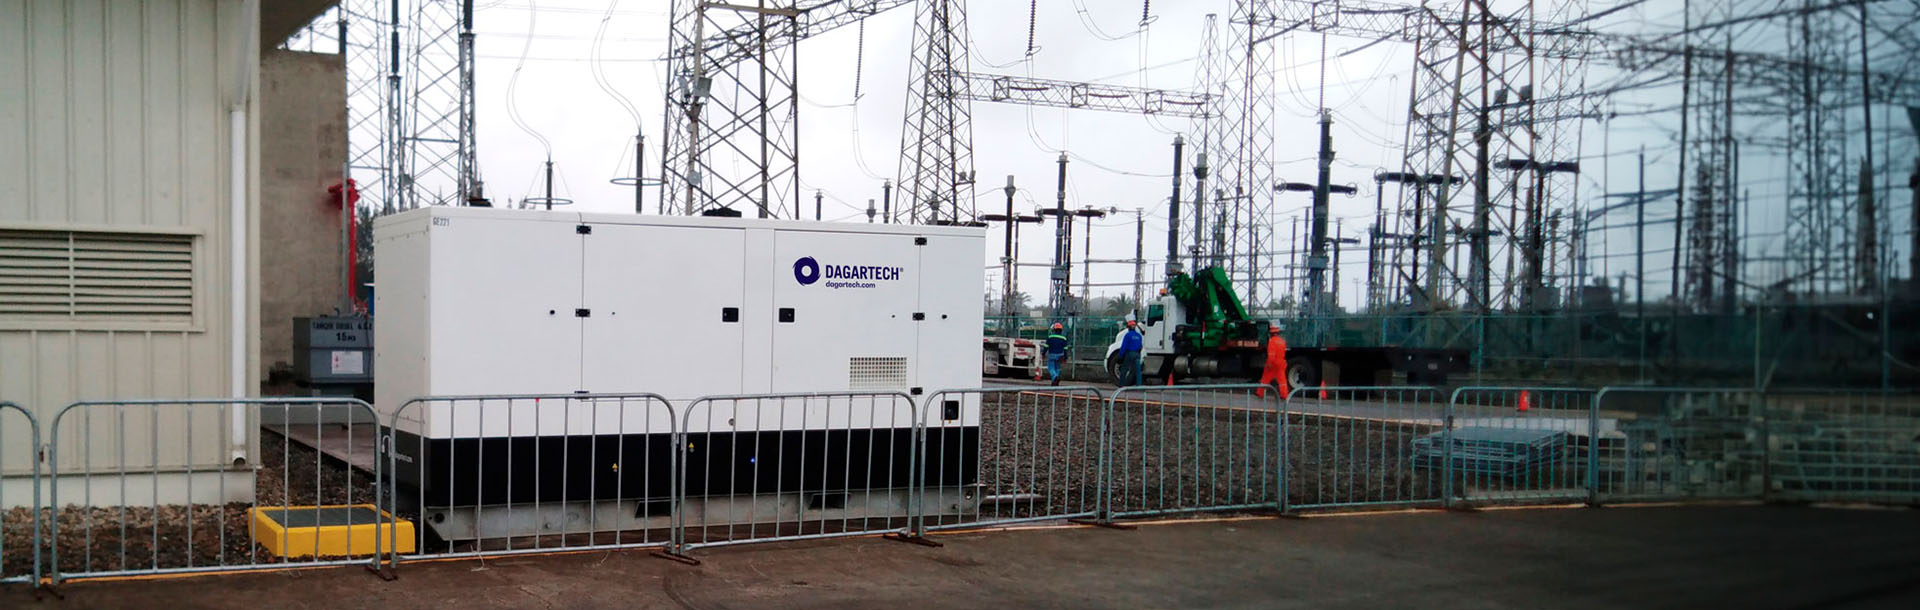 4,800 kW of Dagartech power guarantees the maintenance of the Tuxpan Thermoelectric Power Plant, Mexico